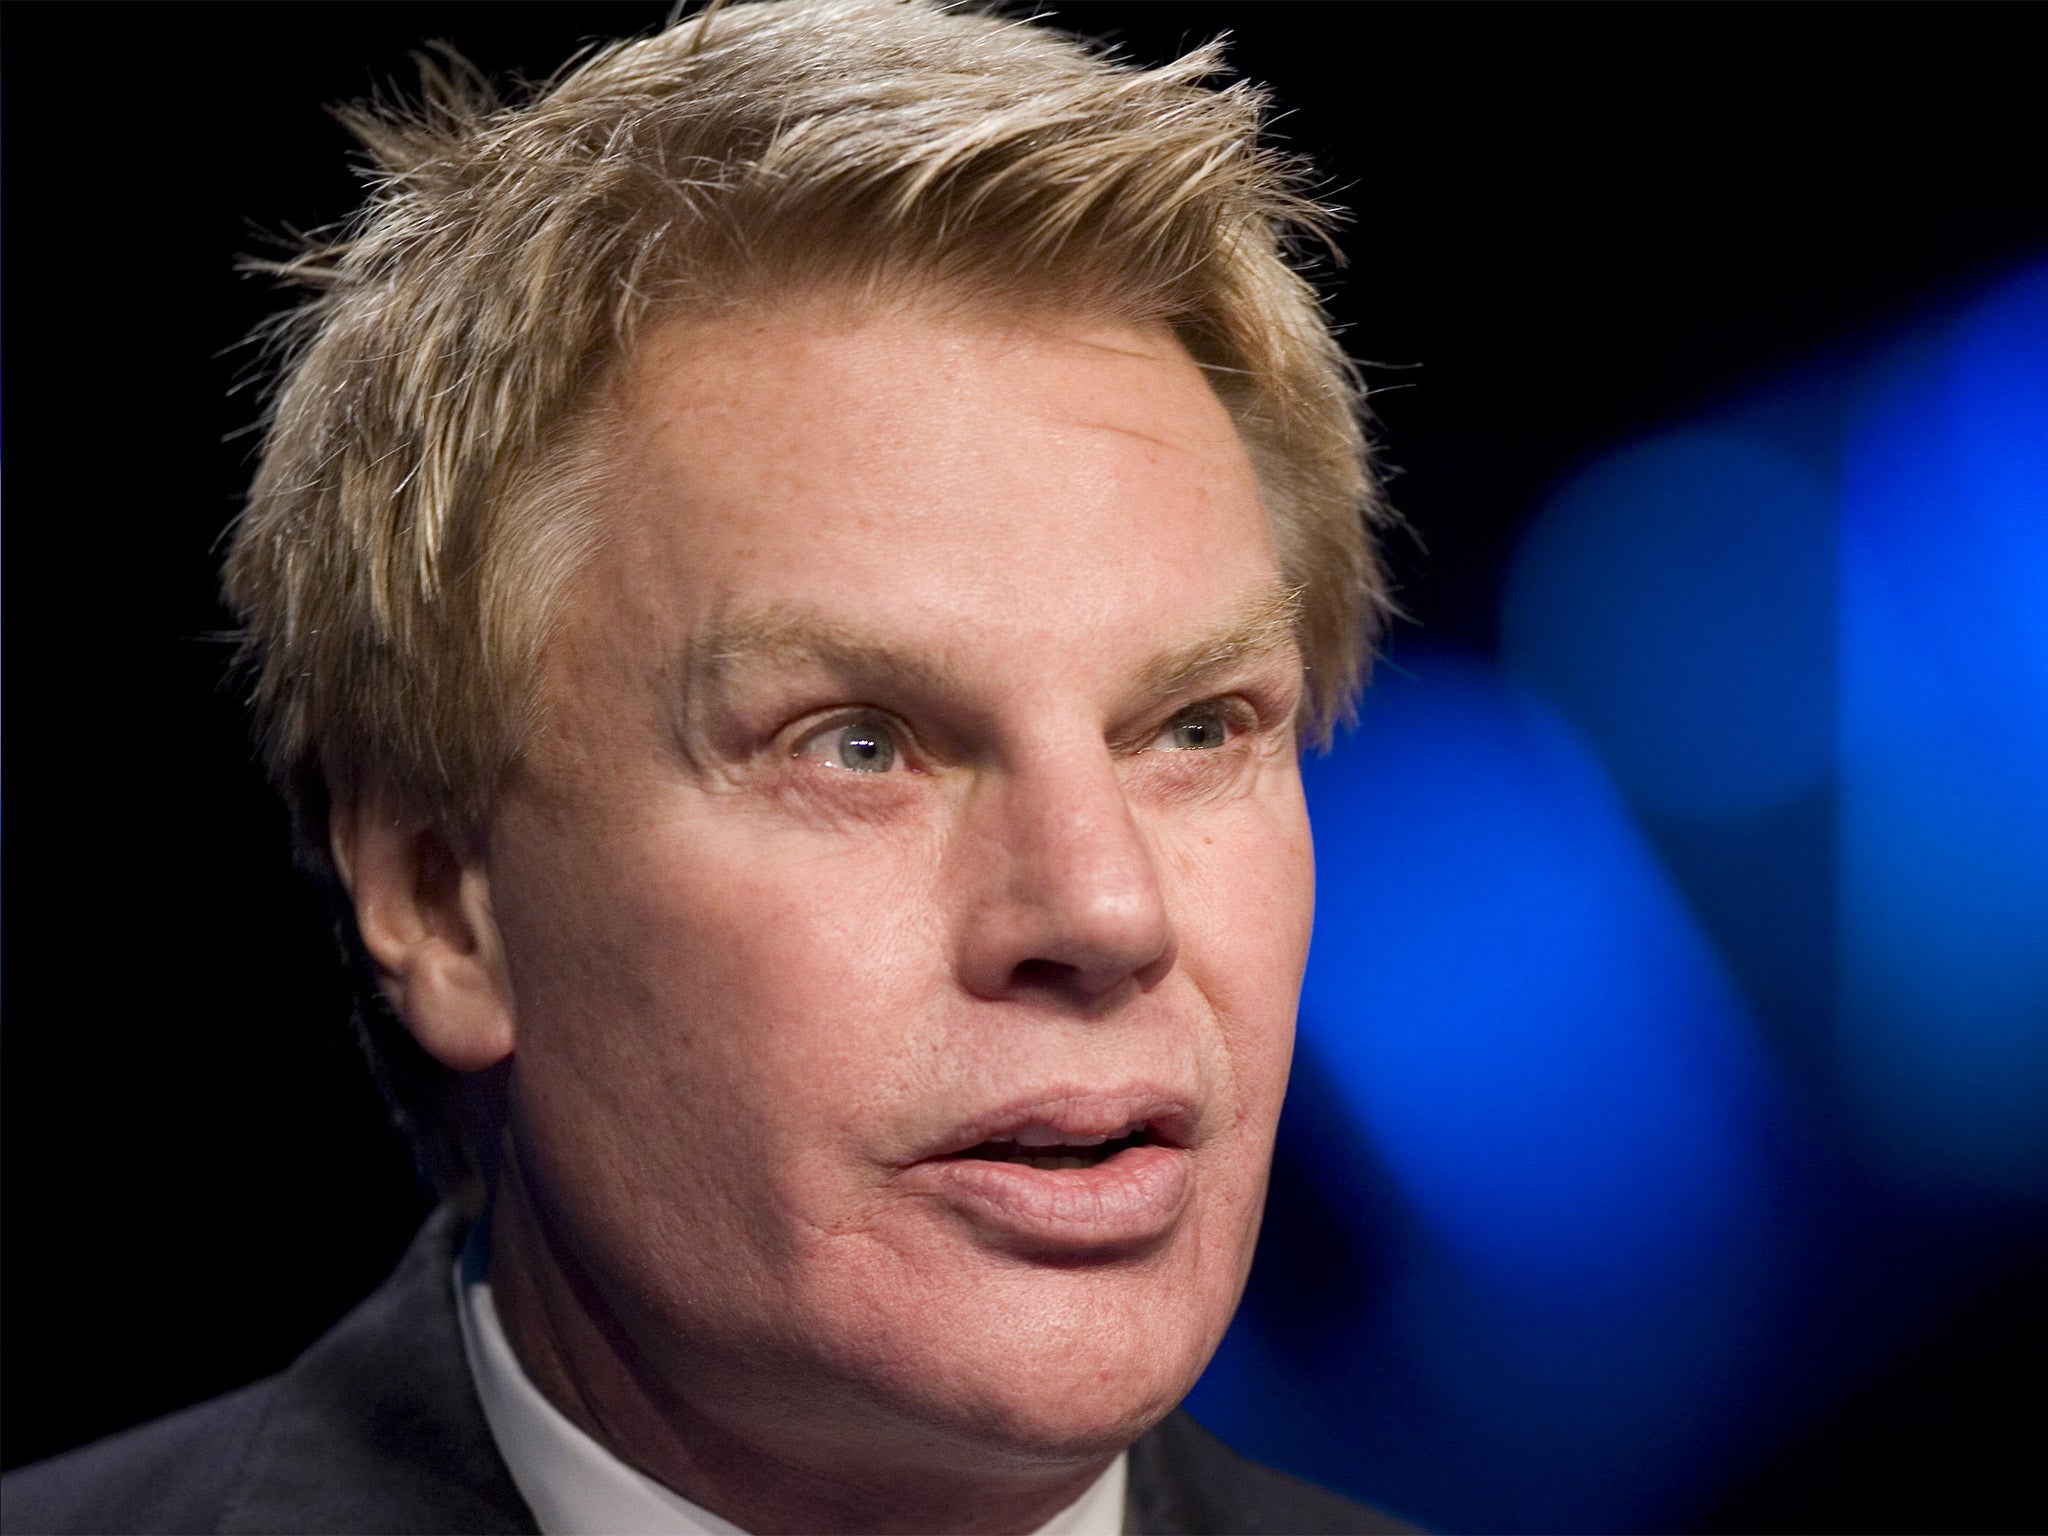 Abercrombie &amp; Fitch slashed its profit forecasts for the year under Mike Jeffries